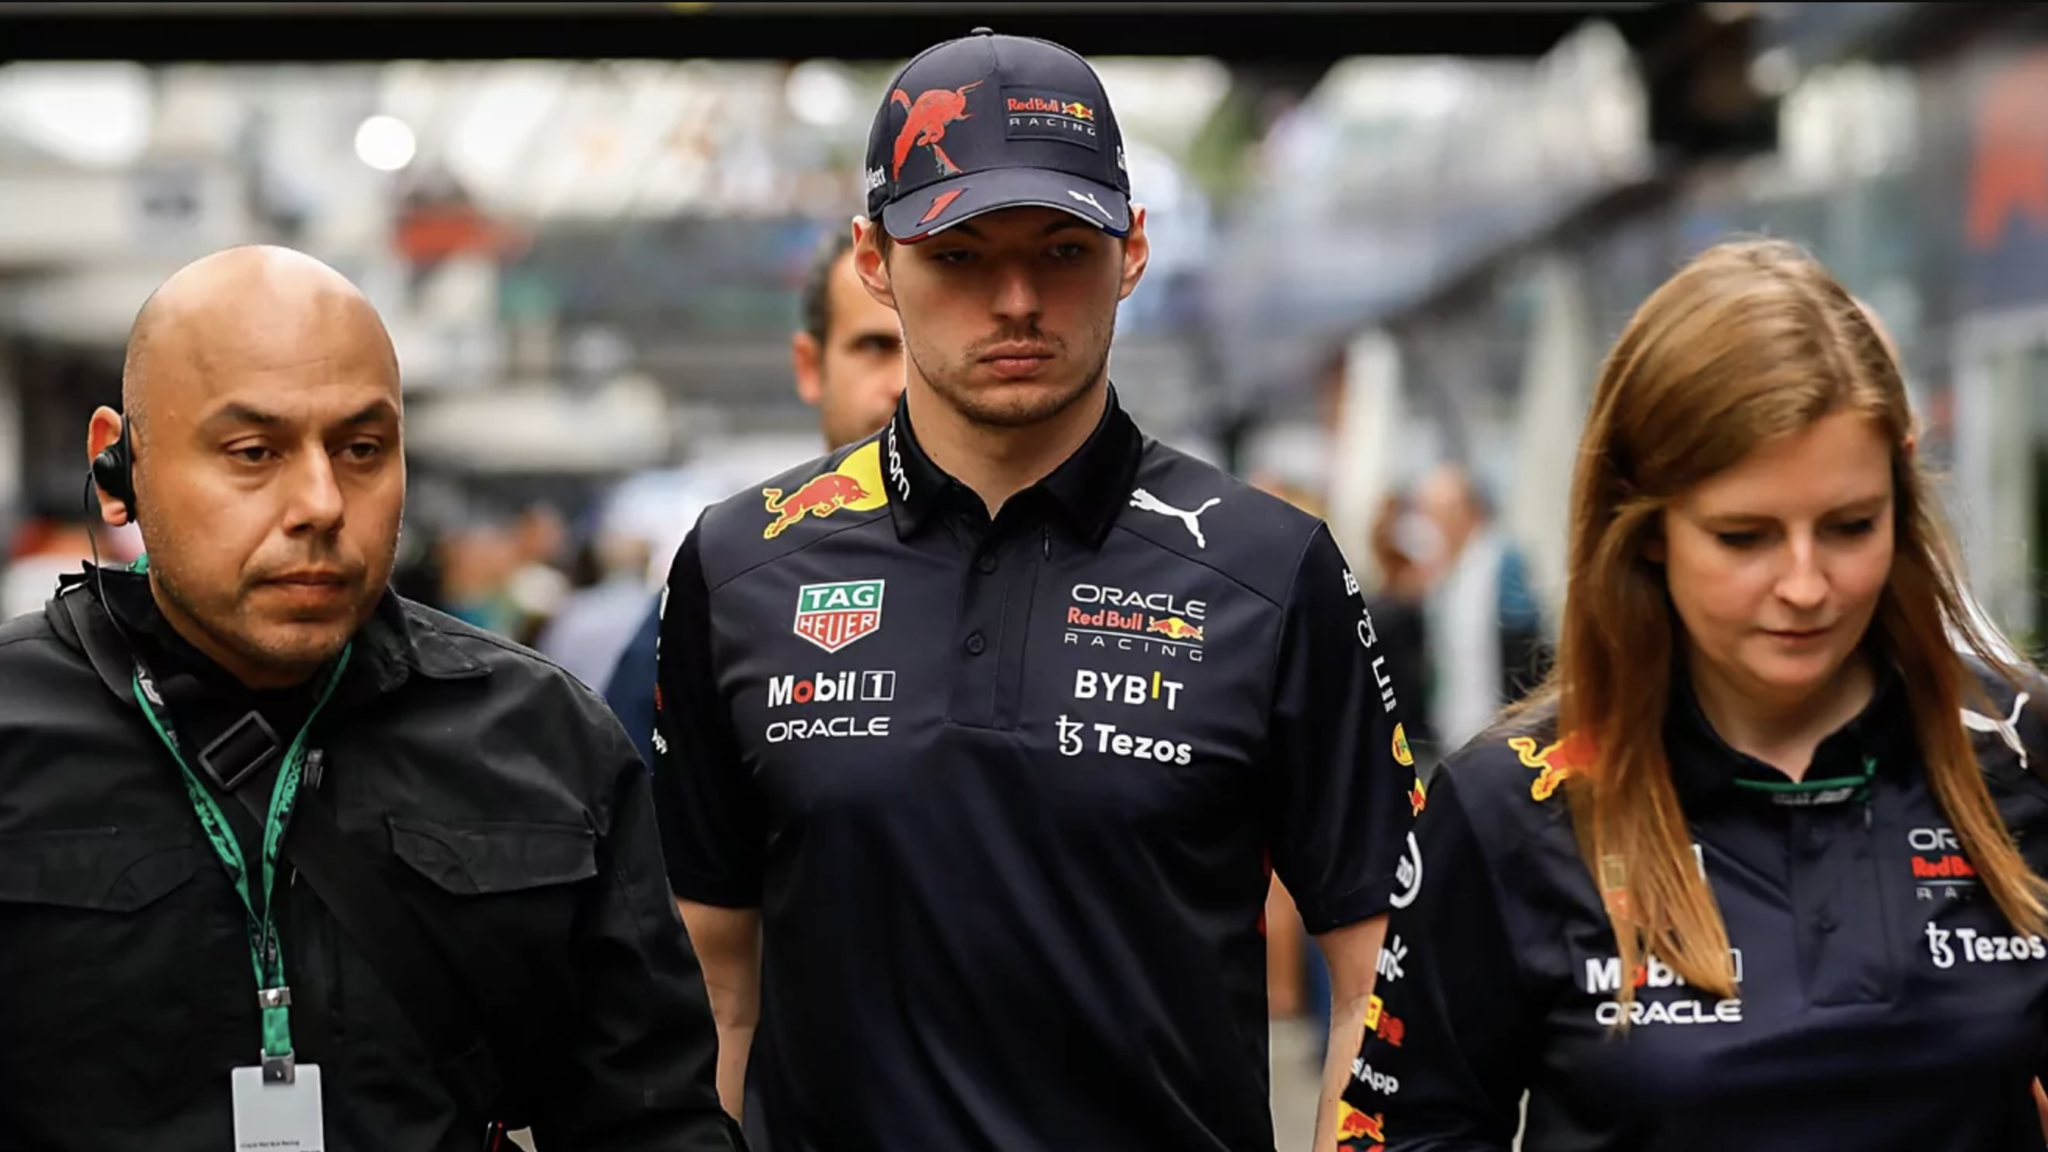 F1 is angry with Verstappen: No one will want to work with him